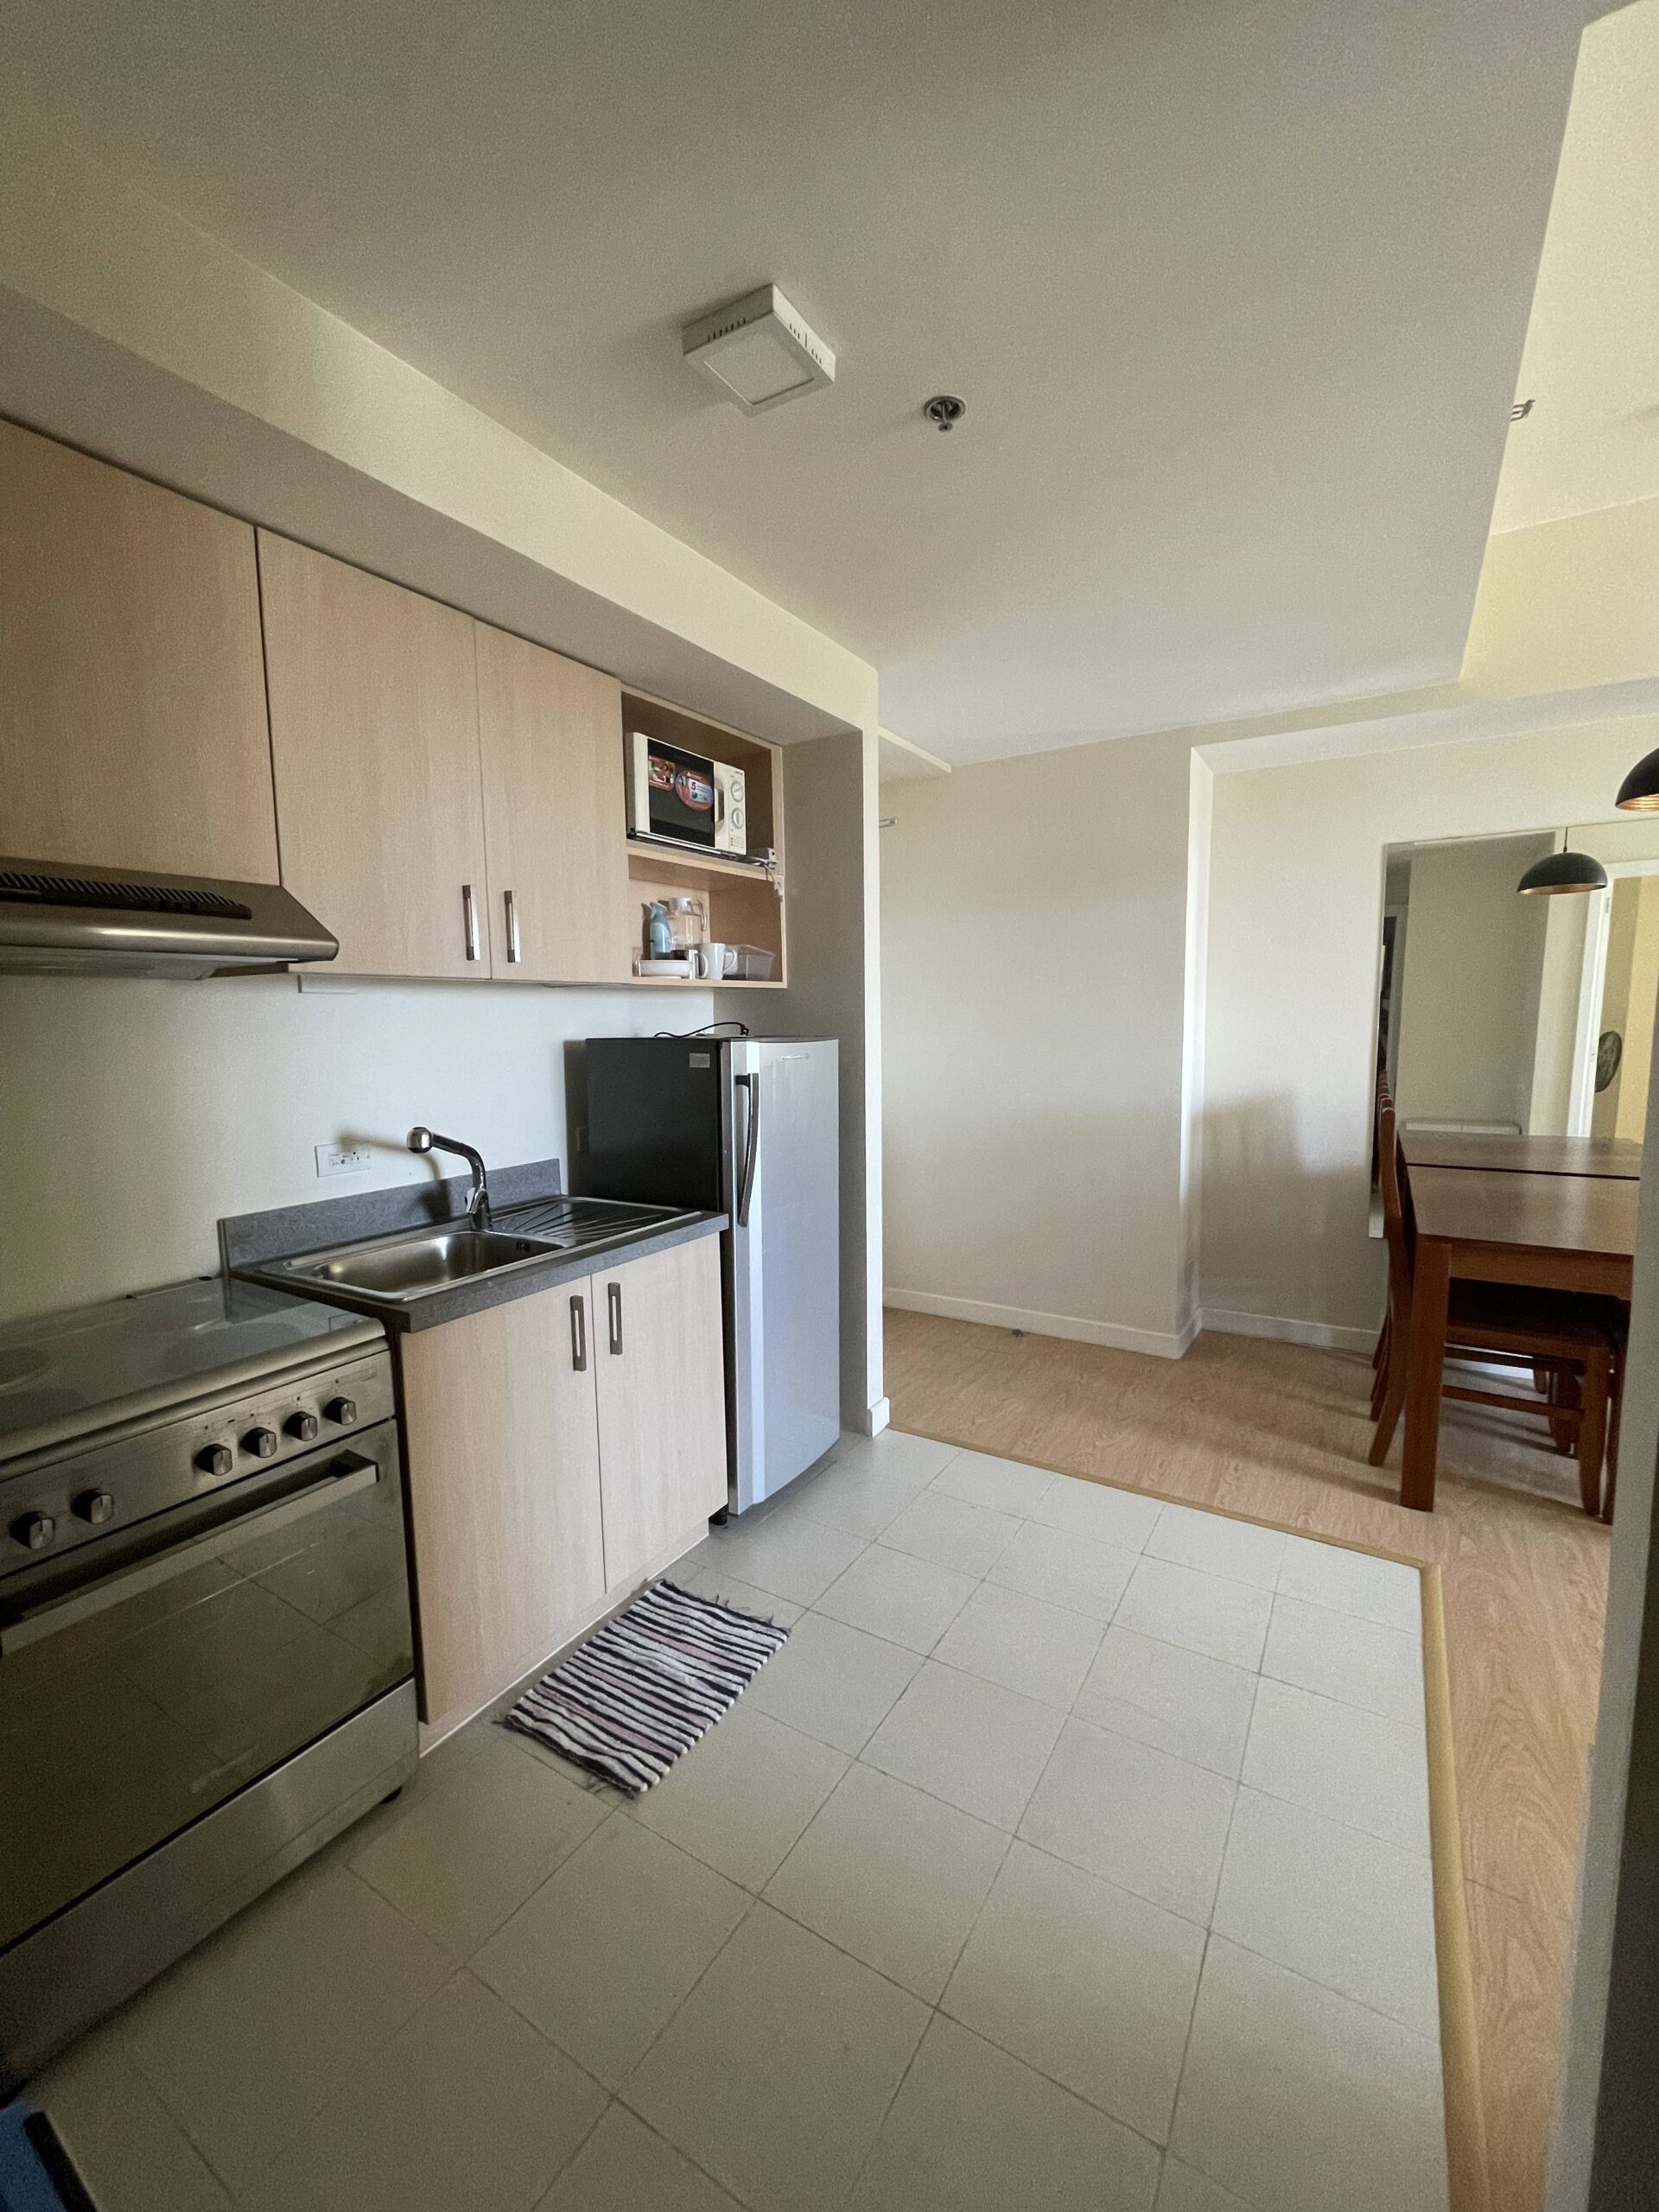 1 Bedroom Condo Unit in The Grove by Rockwell, Pasig City